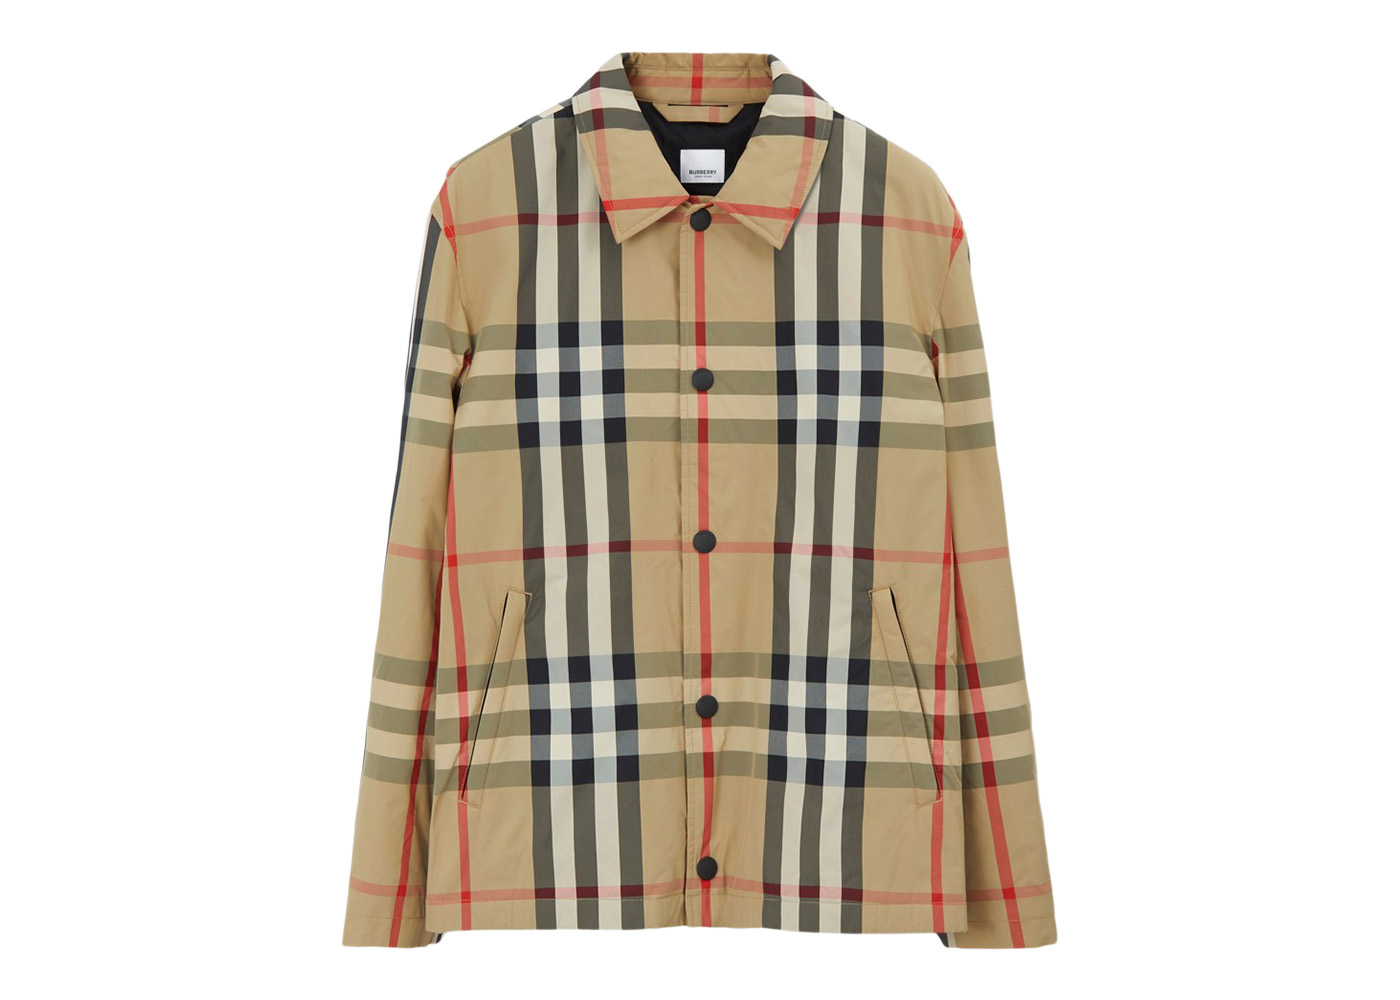 Burberry Blue Exaggerated Check Shirt